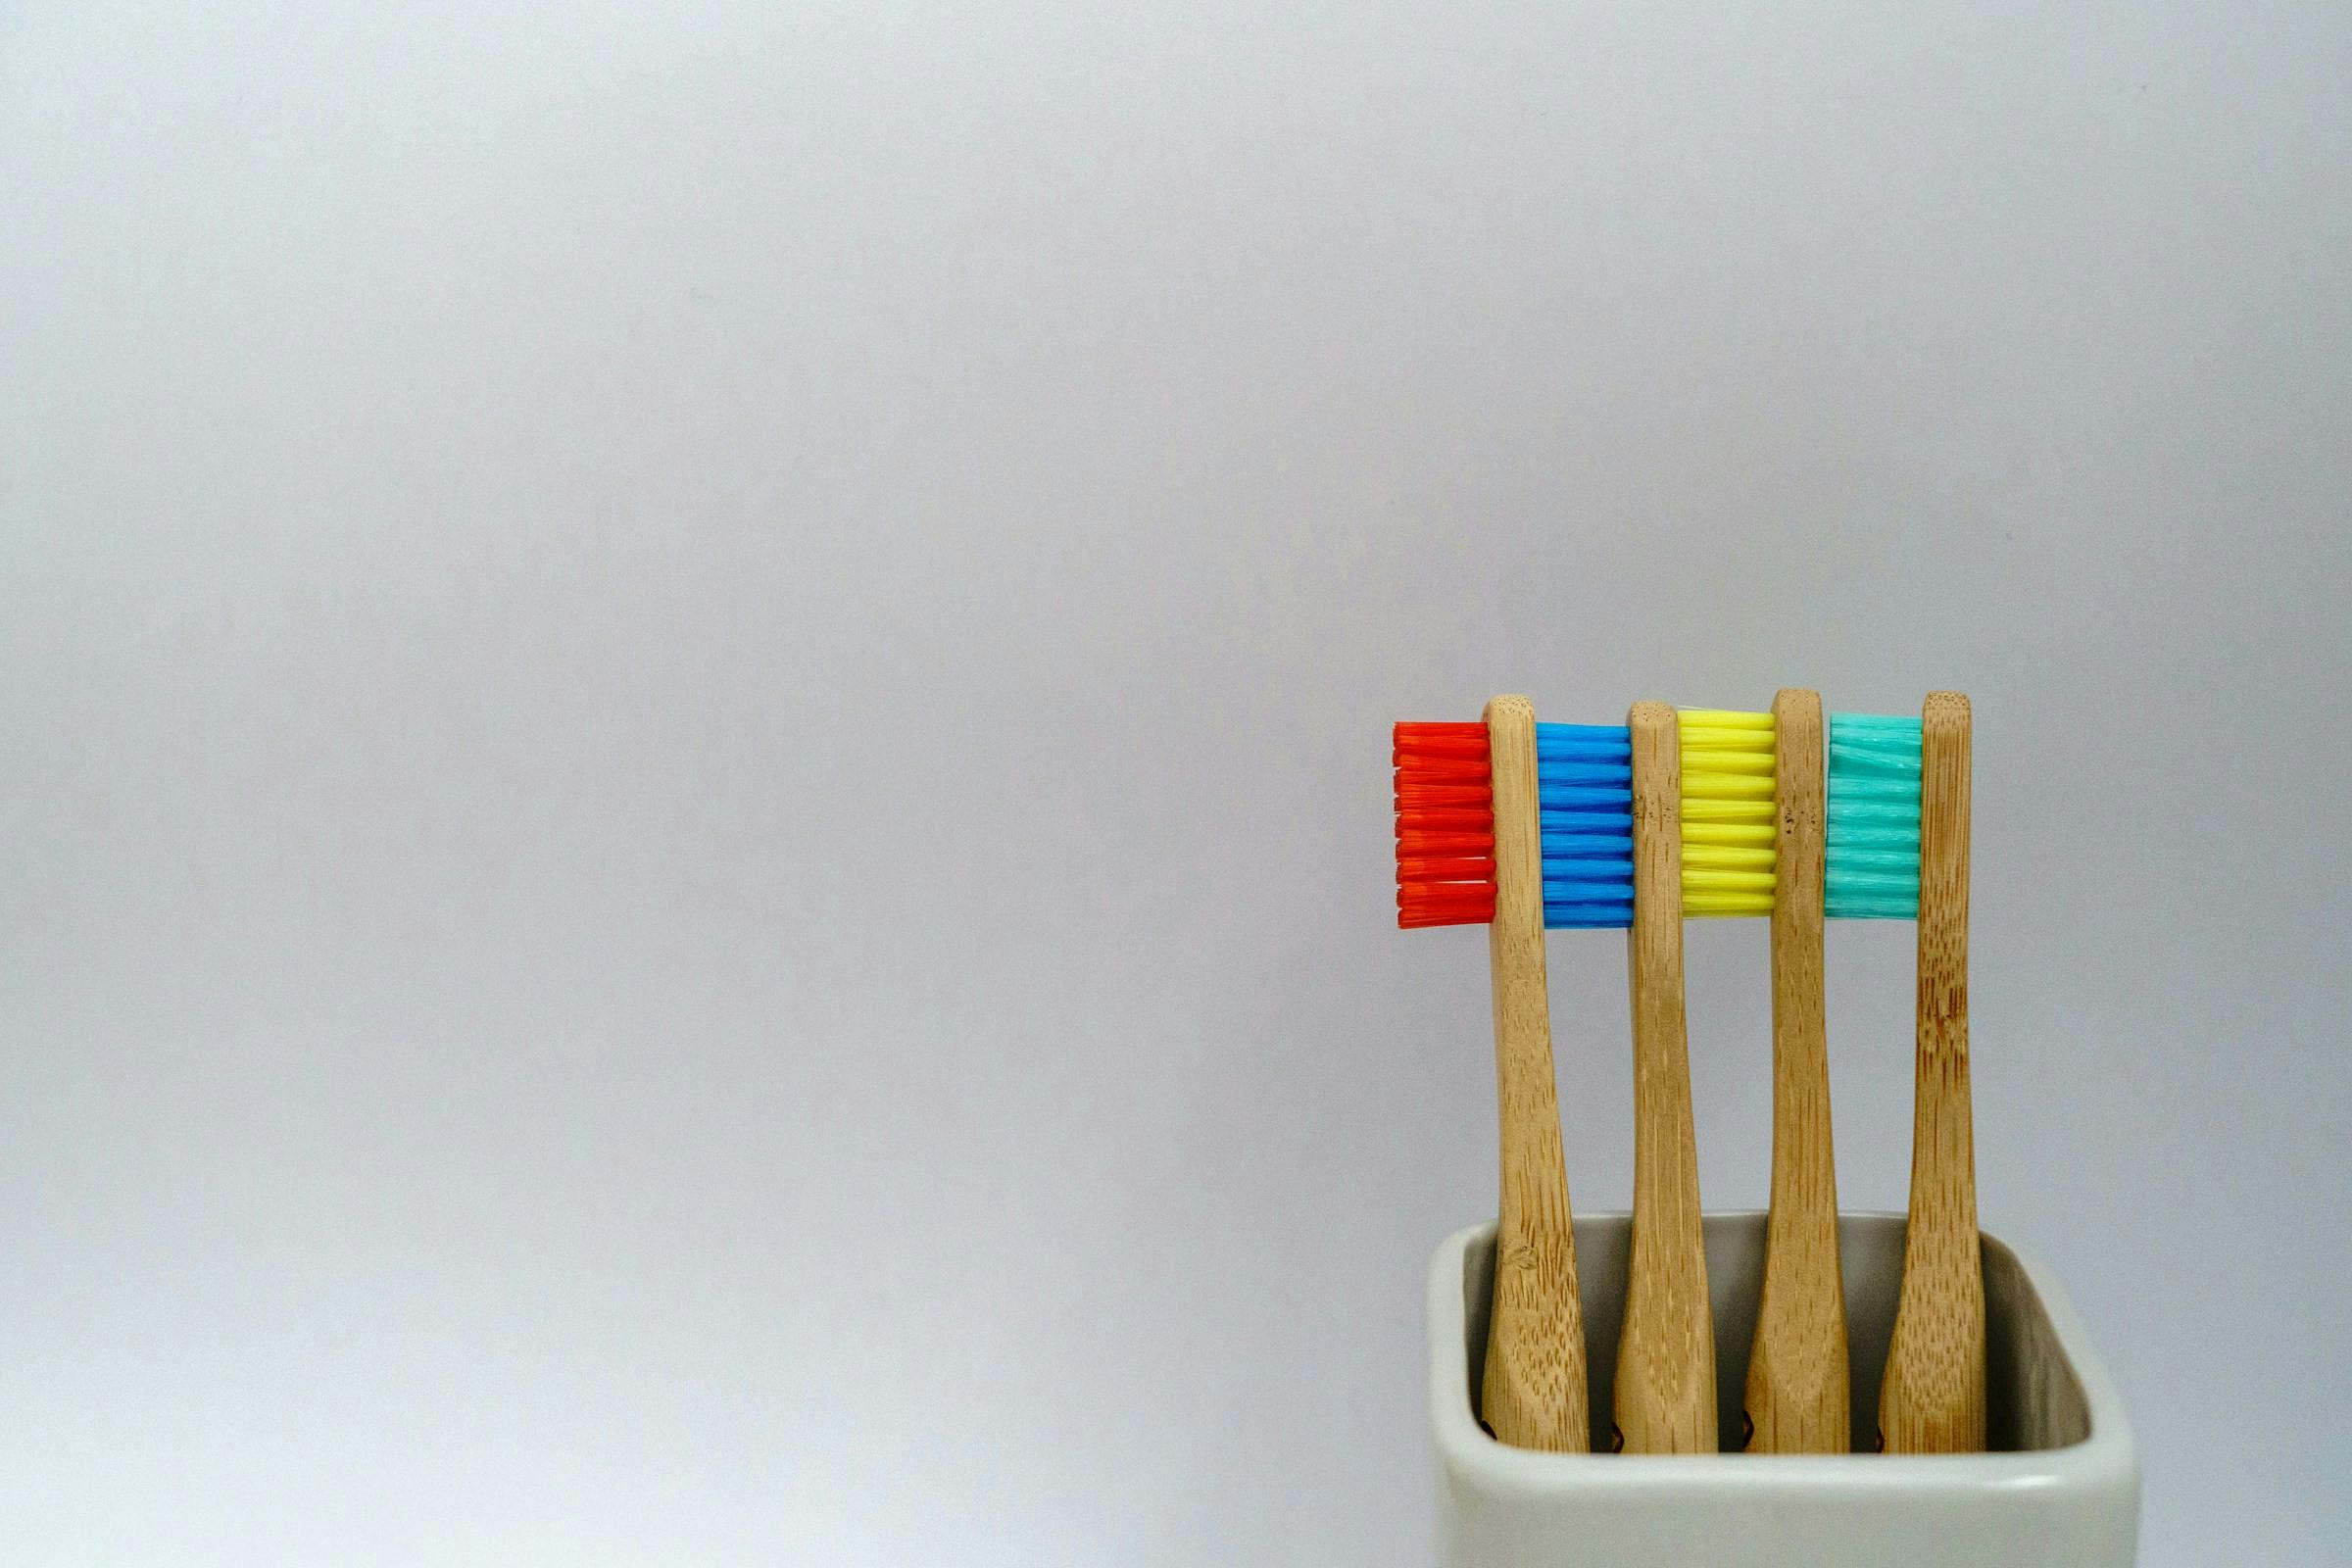 An assortment of colorful toothbrushes with bamboo handles, promoting eco-friendly dental hygiene